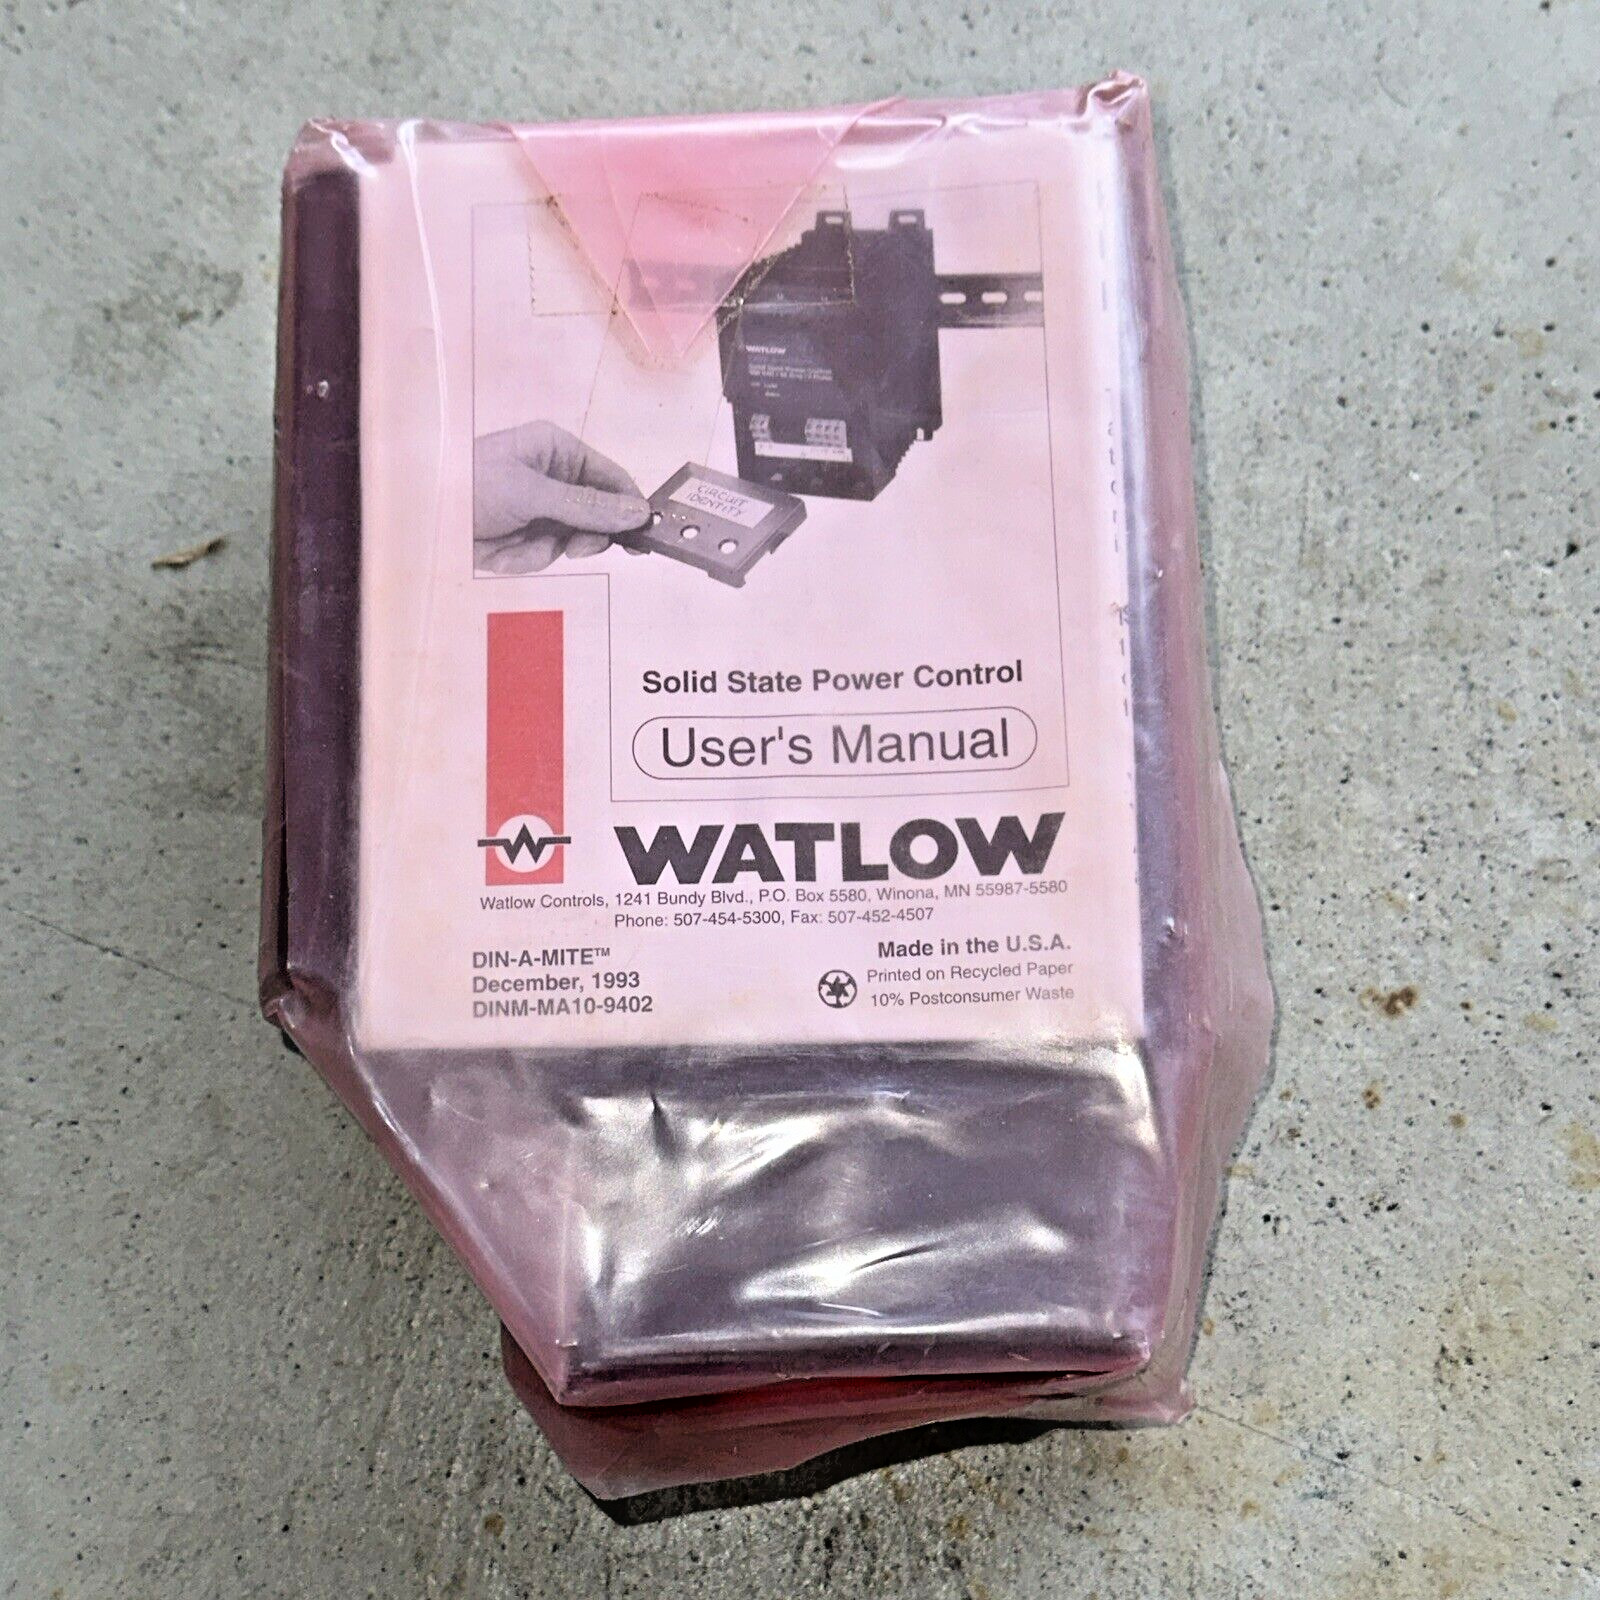 Watlow DIN-a-mite Solid State Power Control #DM2V-5660-F000, 600 VAC 56A New